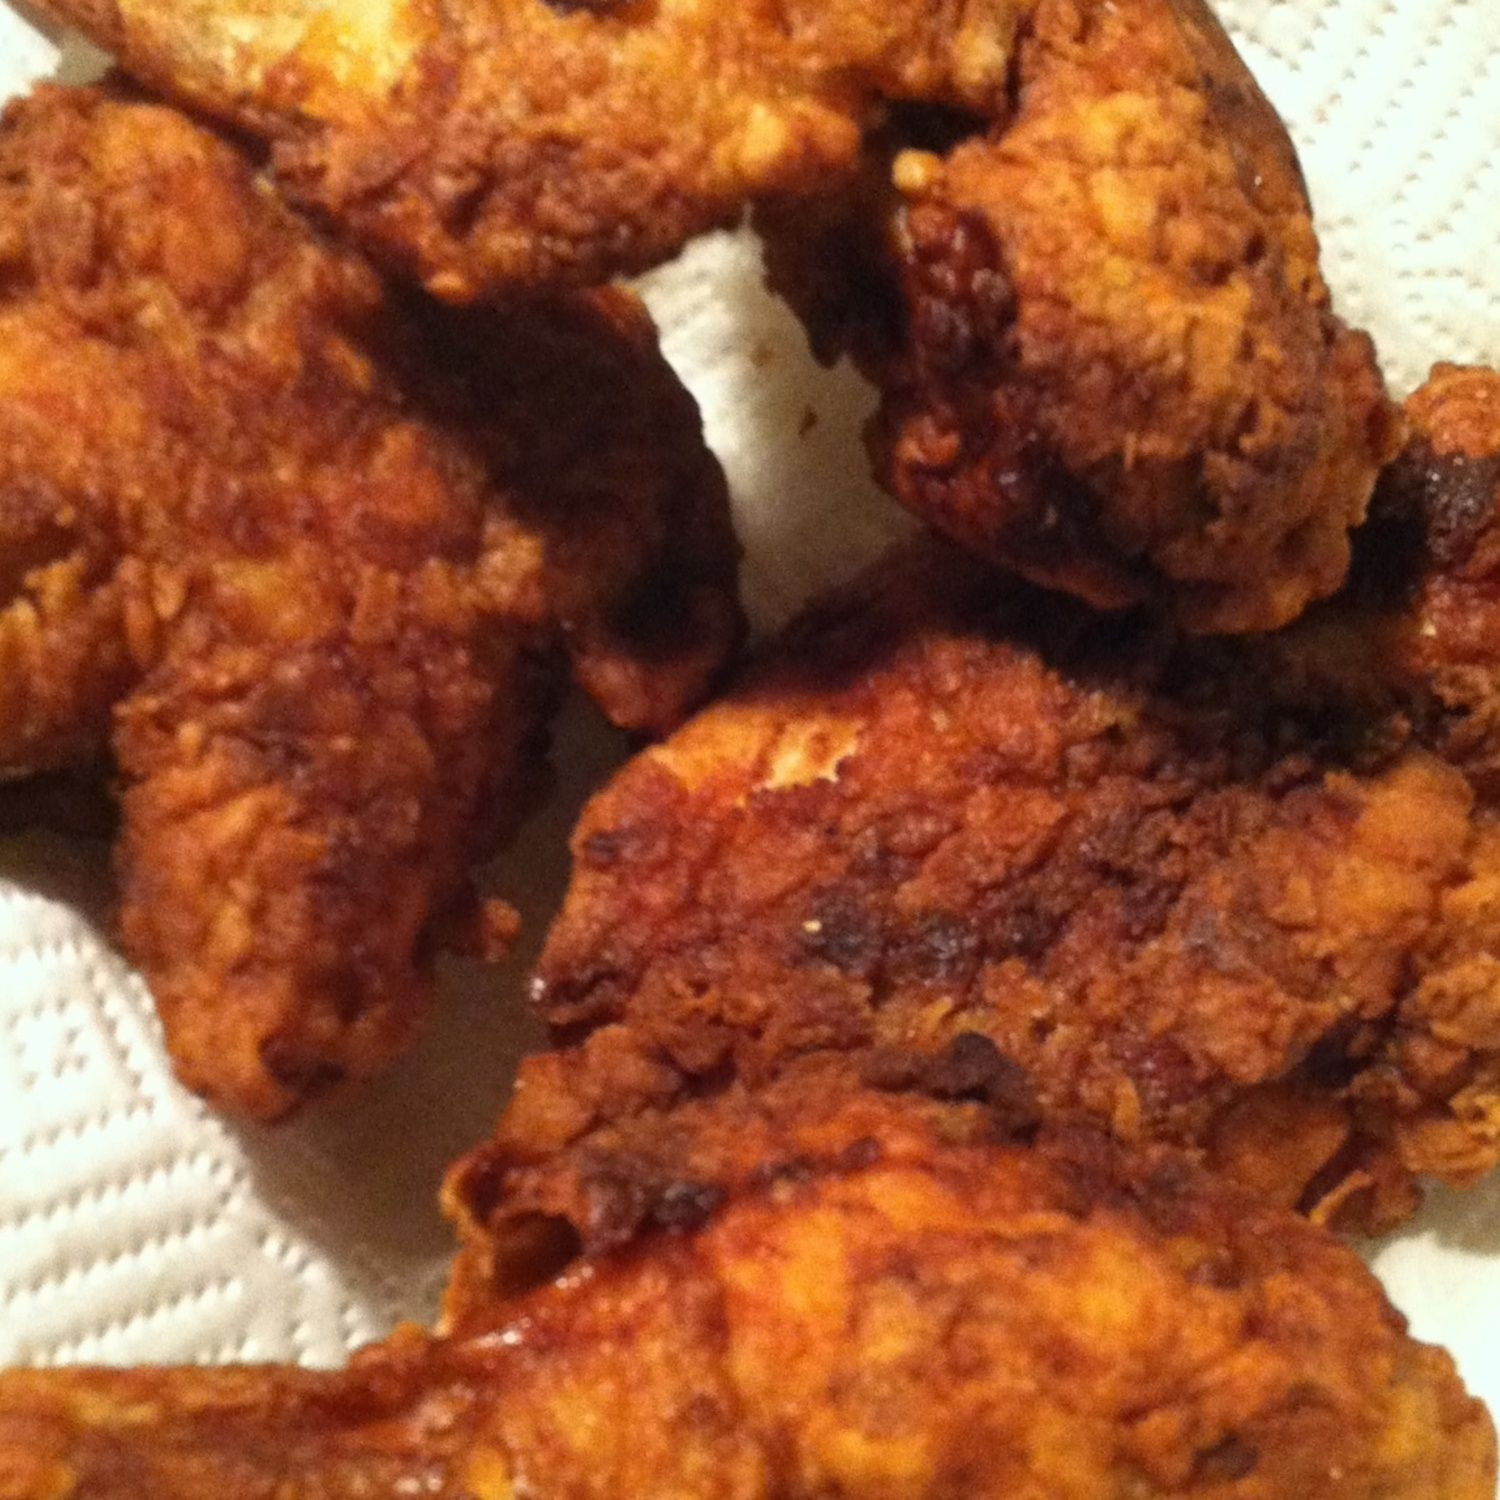 Pressure Cooked Fried Chicken Recipe
 "As Close to KFC as I Can Get it" Fried Chicken